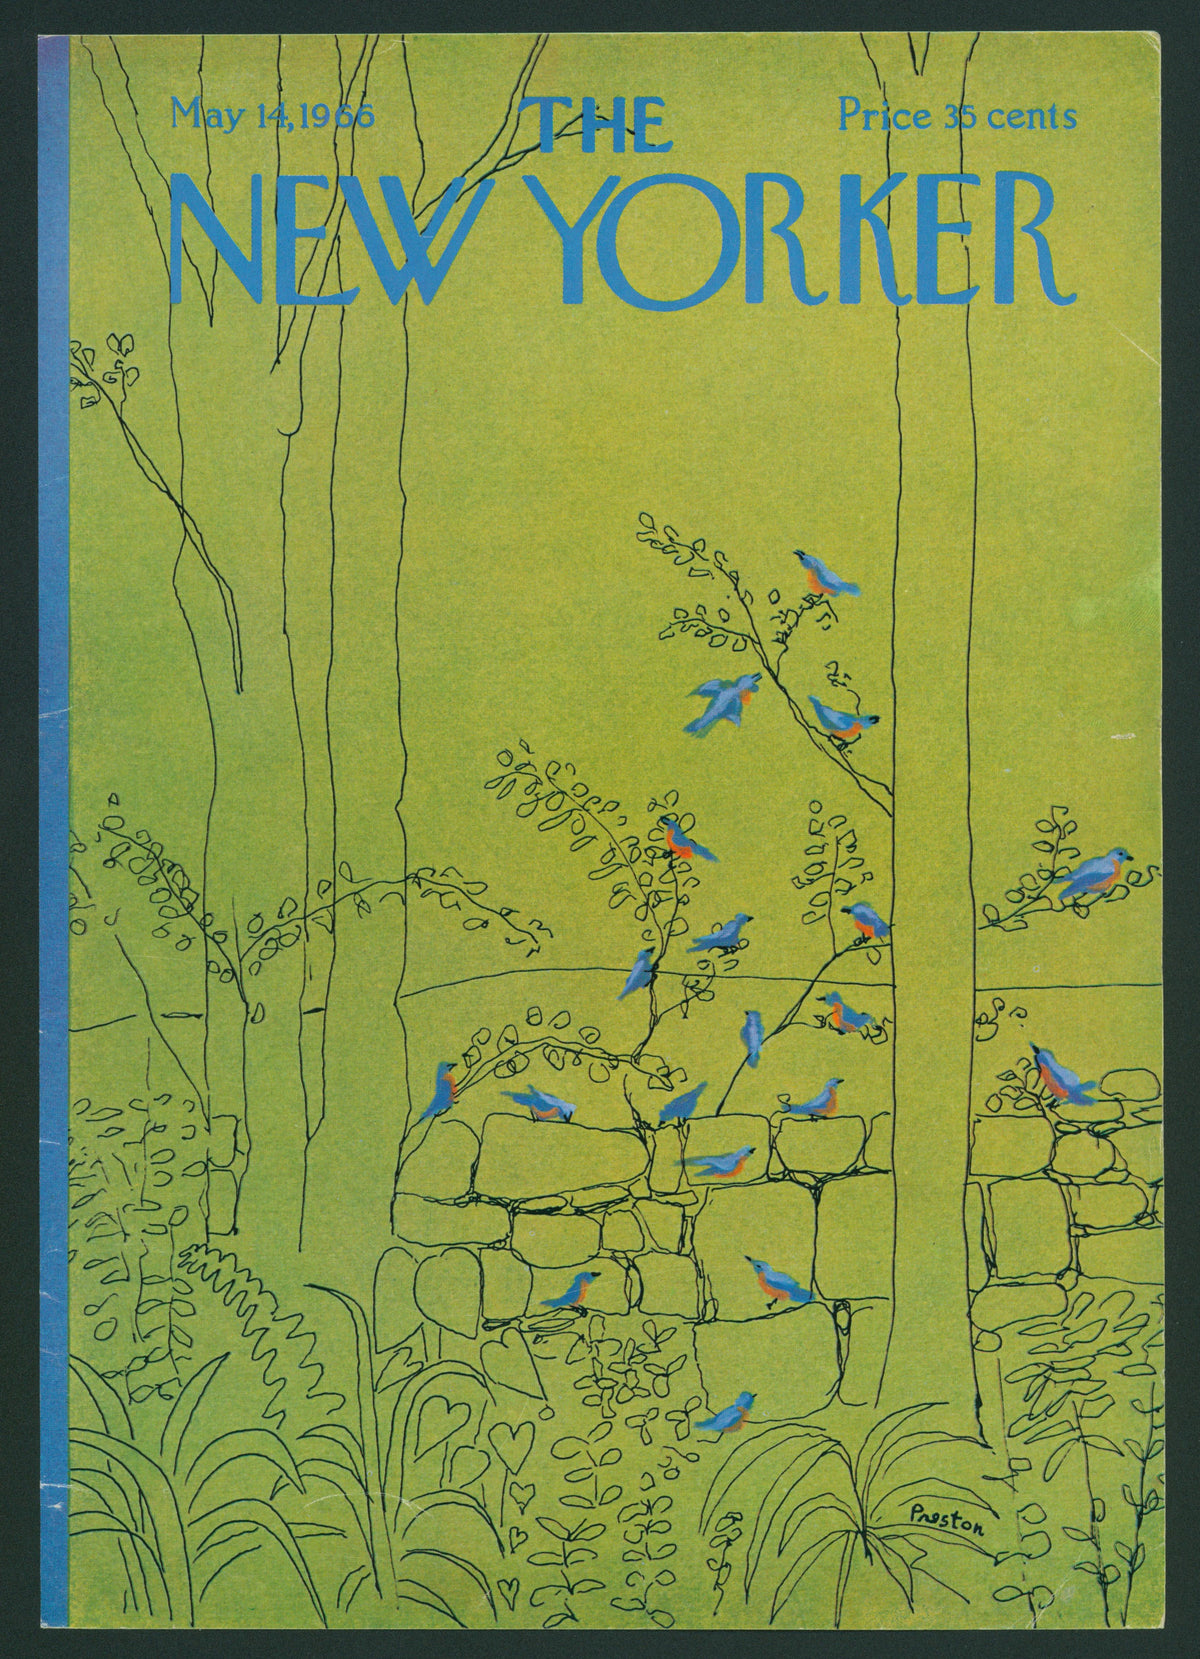 Spring Bluebirds- The New Yorker - Authentic Vintage Antique Print